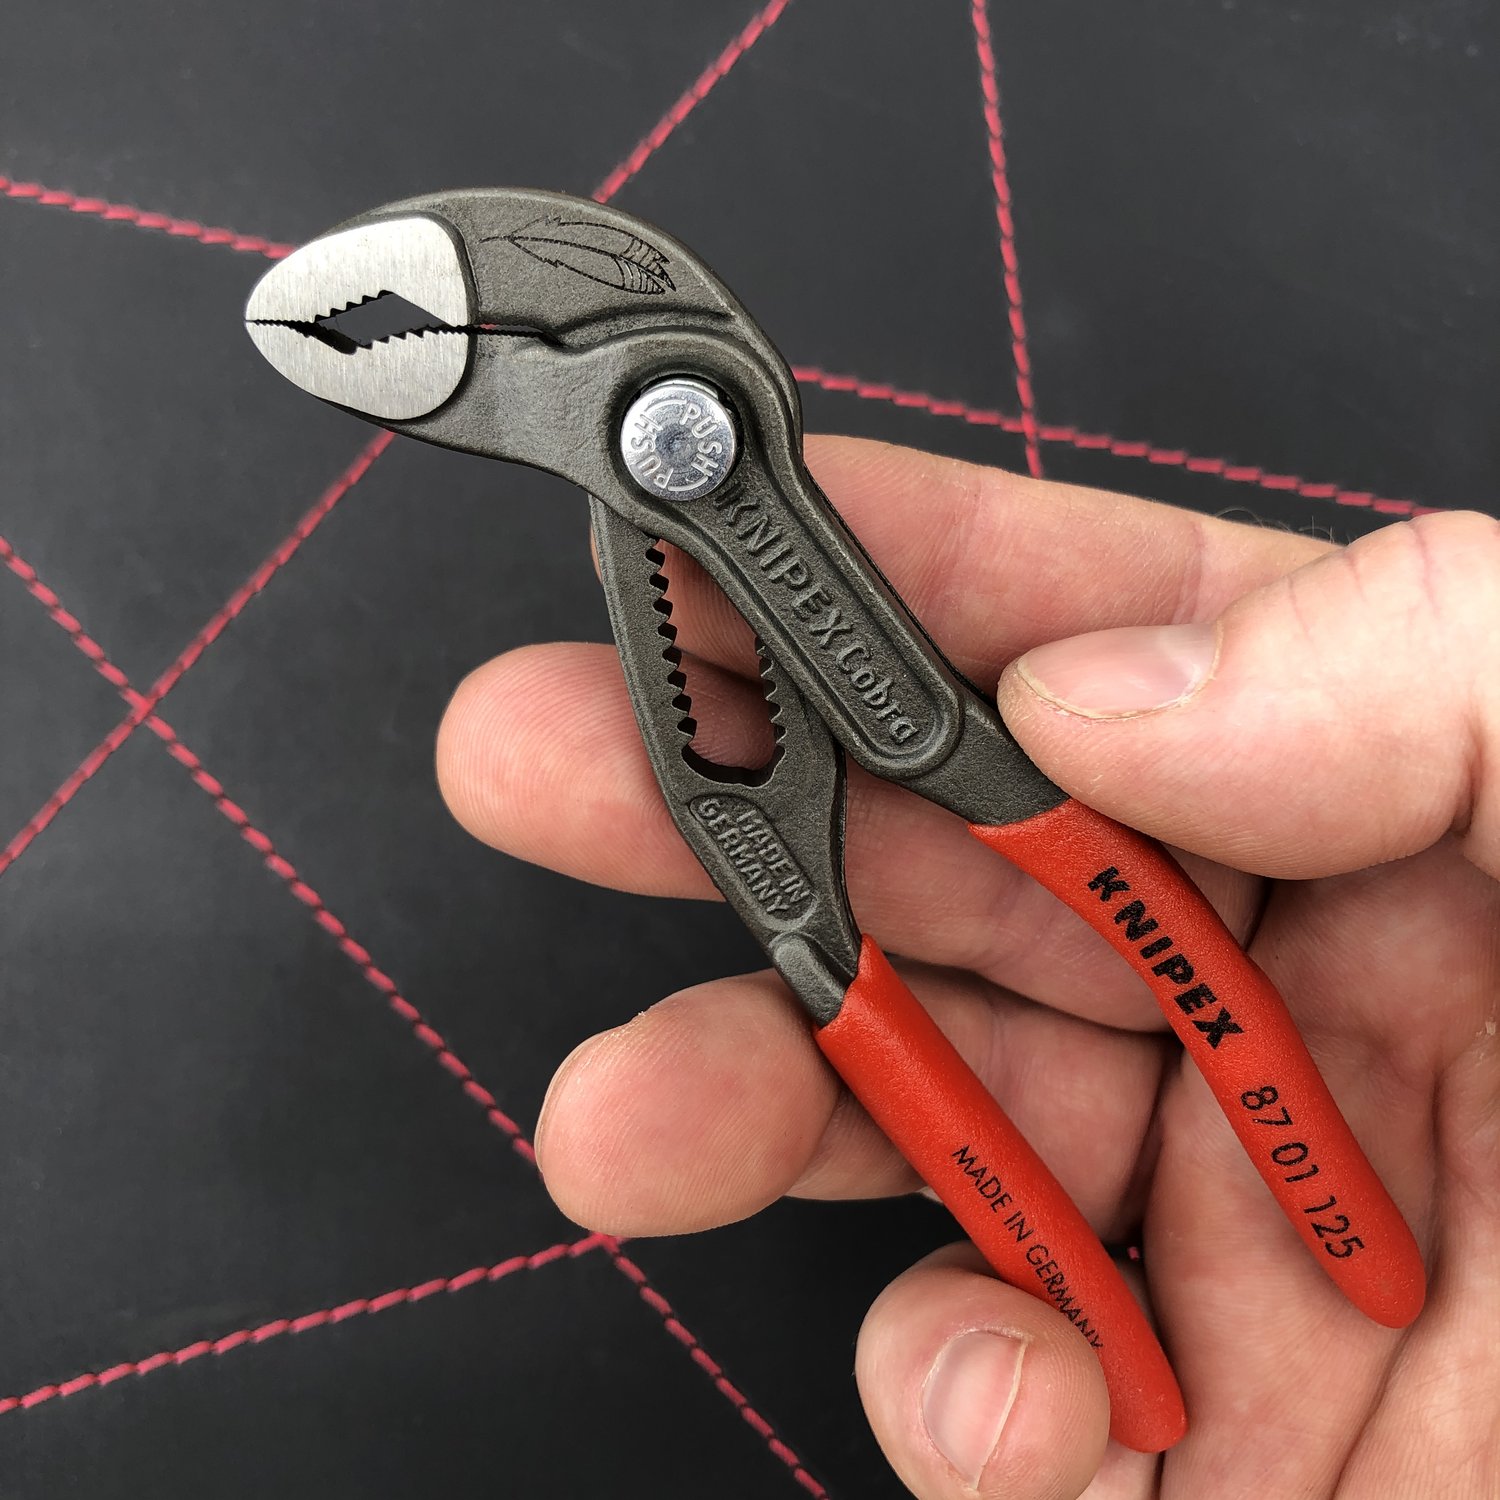 Knipex Mini Pliers Wrench Set 2pc 9K 00 80 121 US from Knipex - Acme Tools